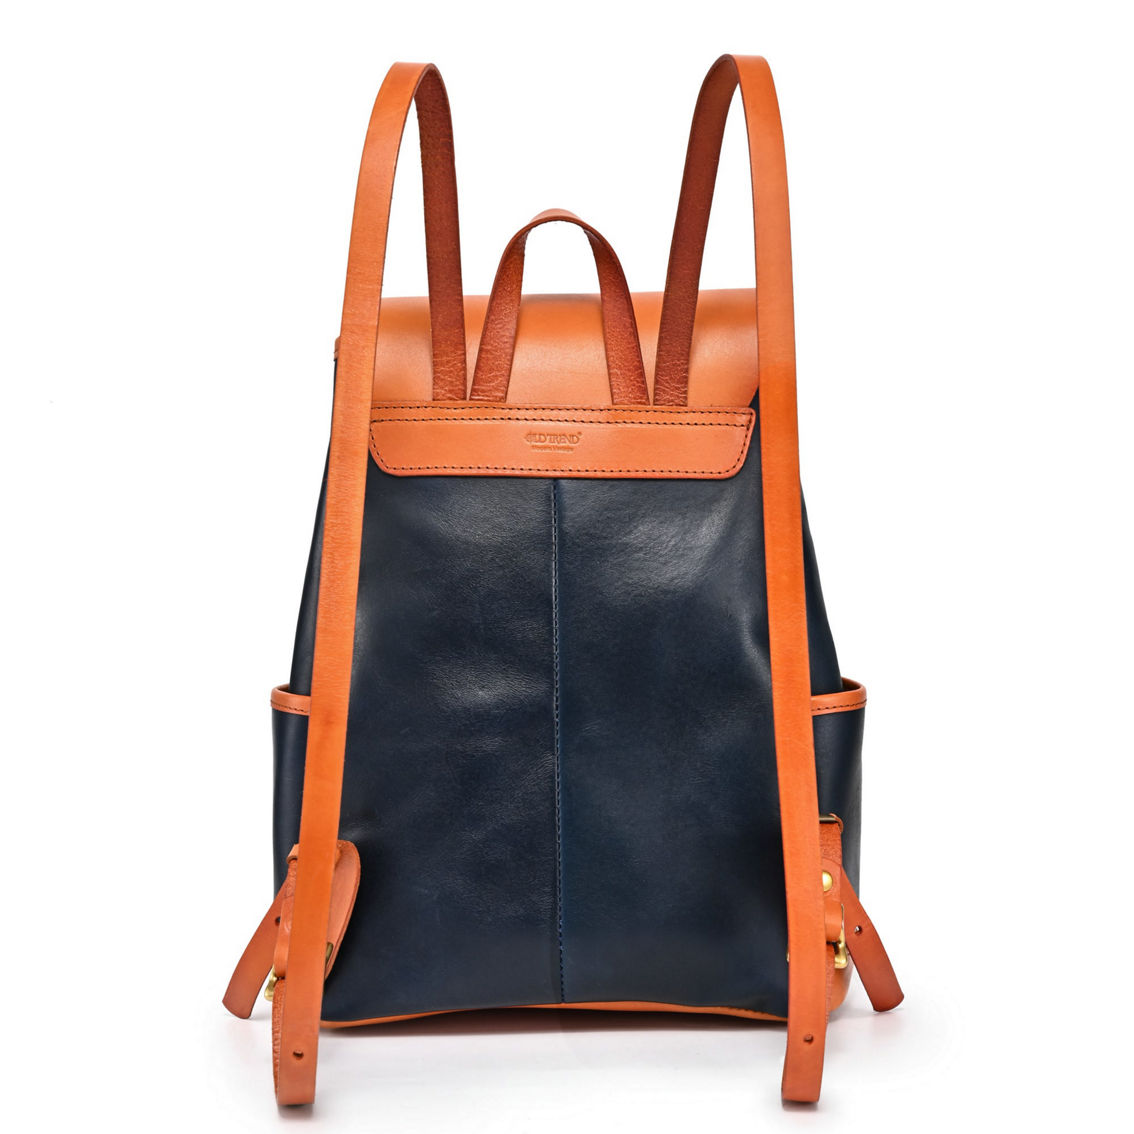 Old Trend Out West Leather Backpack - Image 4 of 5